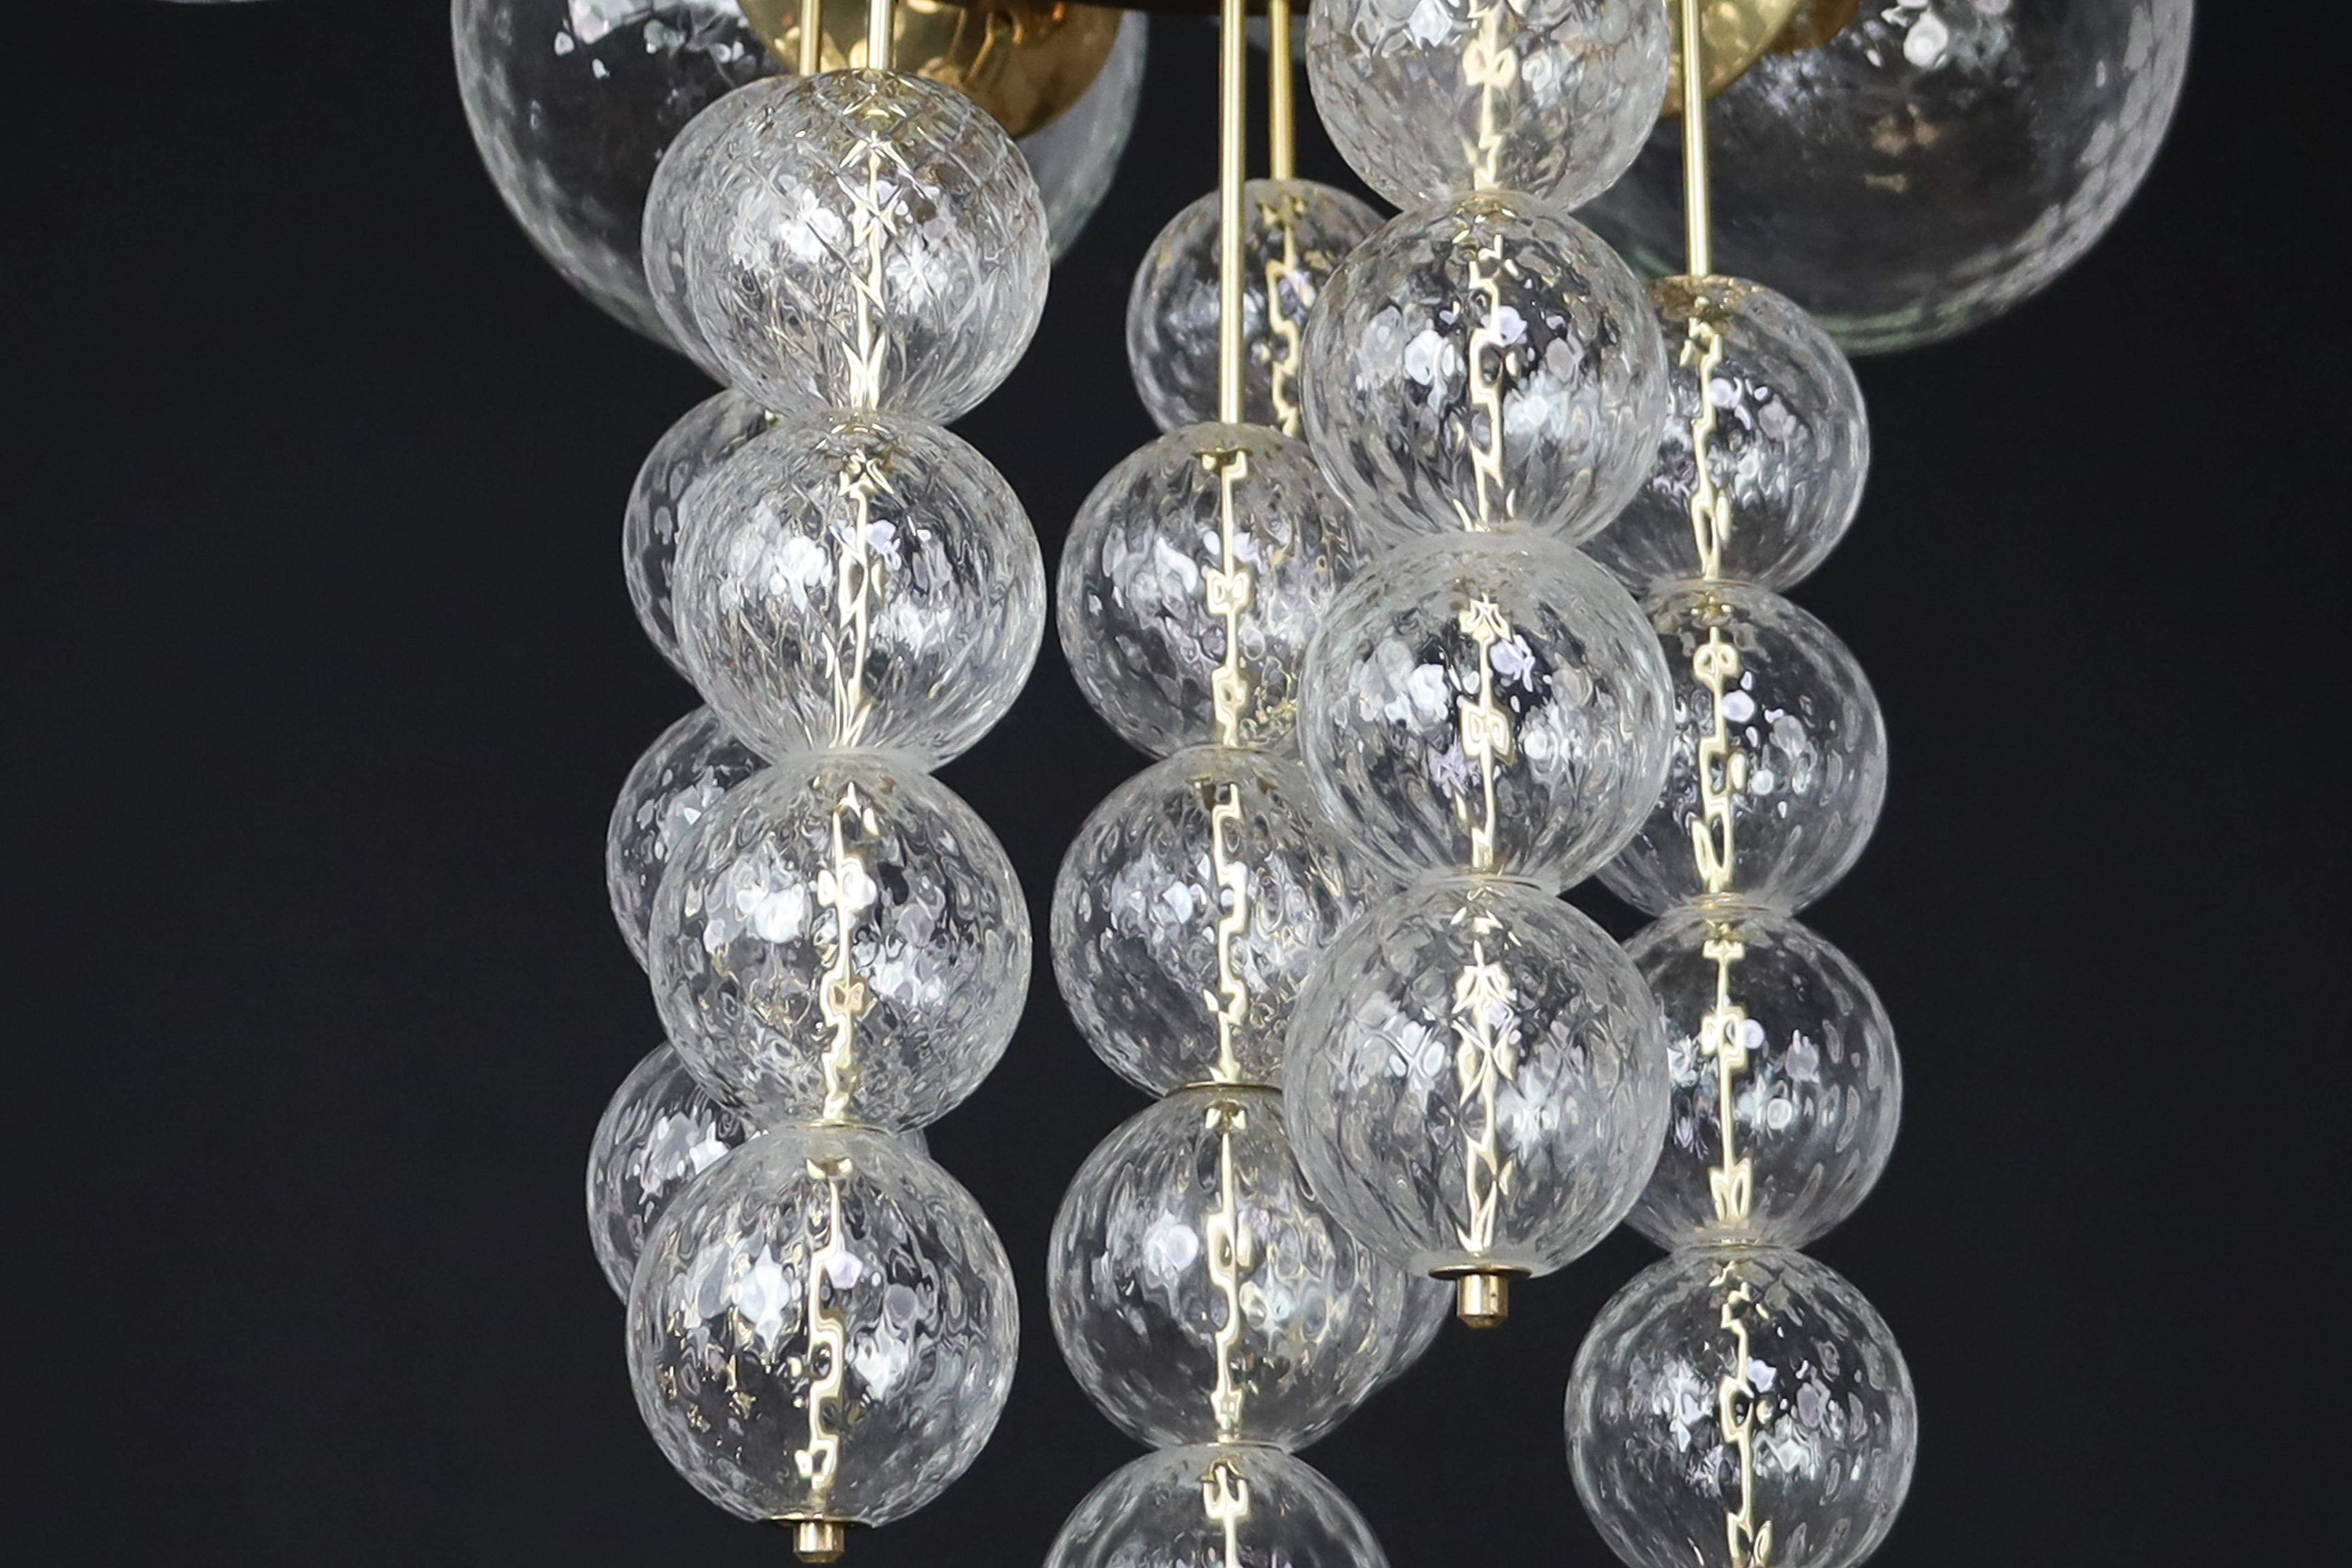 Large Chandelier with brass fixture and hand-blowed glass globes by Preciosa Cz. For Sale 10